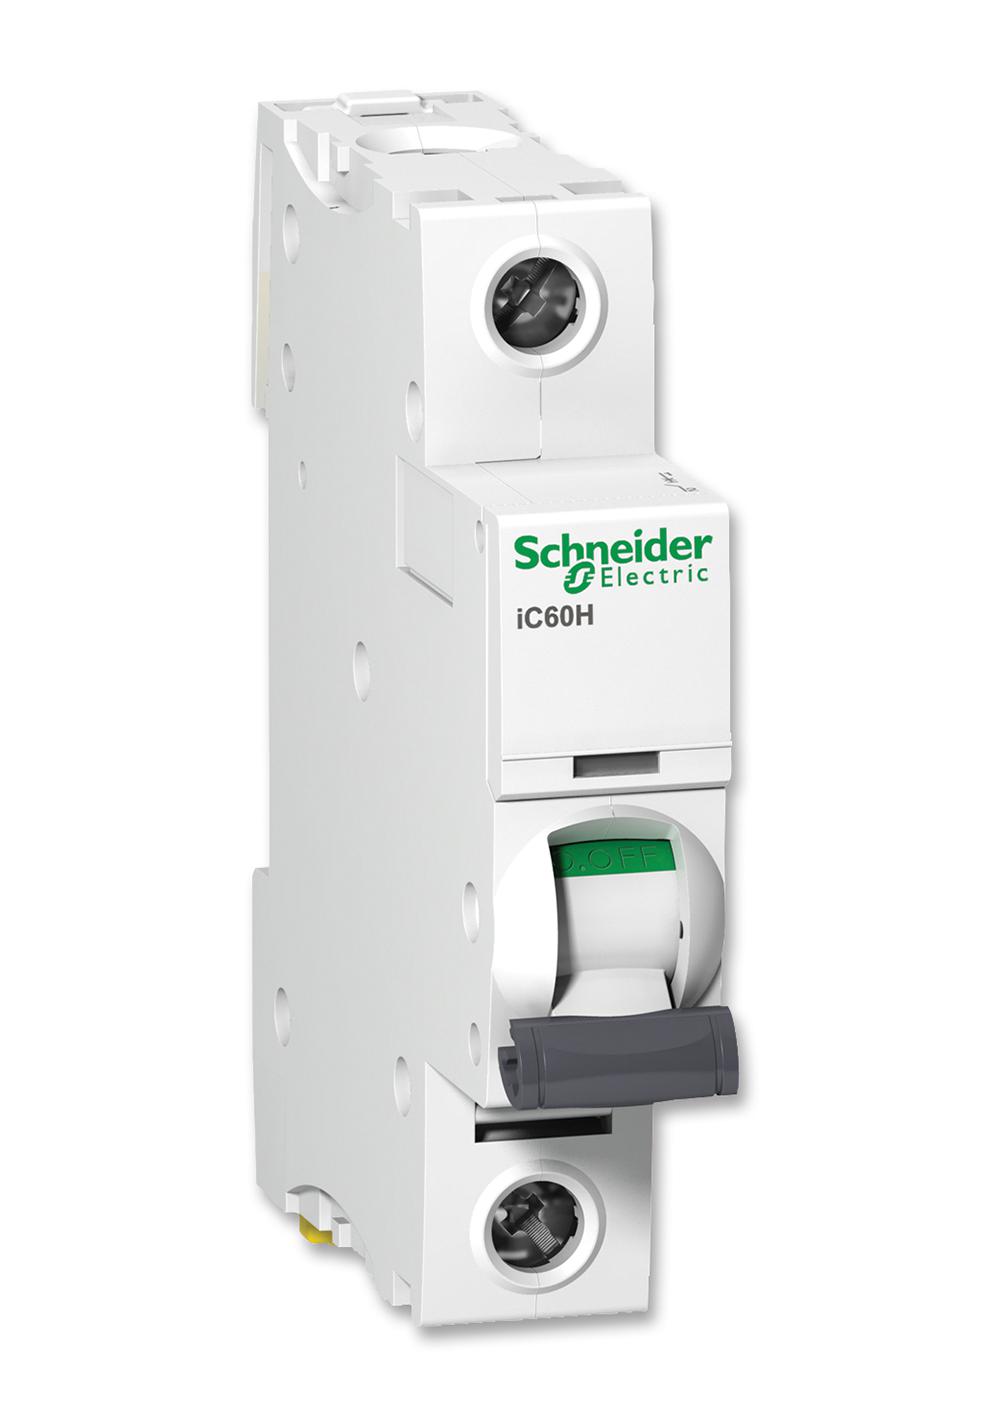 A9F55110 CIRCUIT BREAKER, THERMAL MAGNETIC, 1POLE SCHNEIDER ELECTRIC